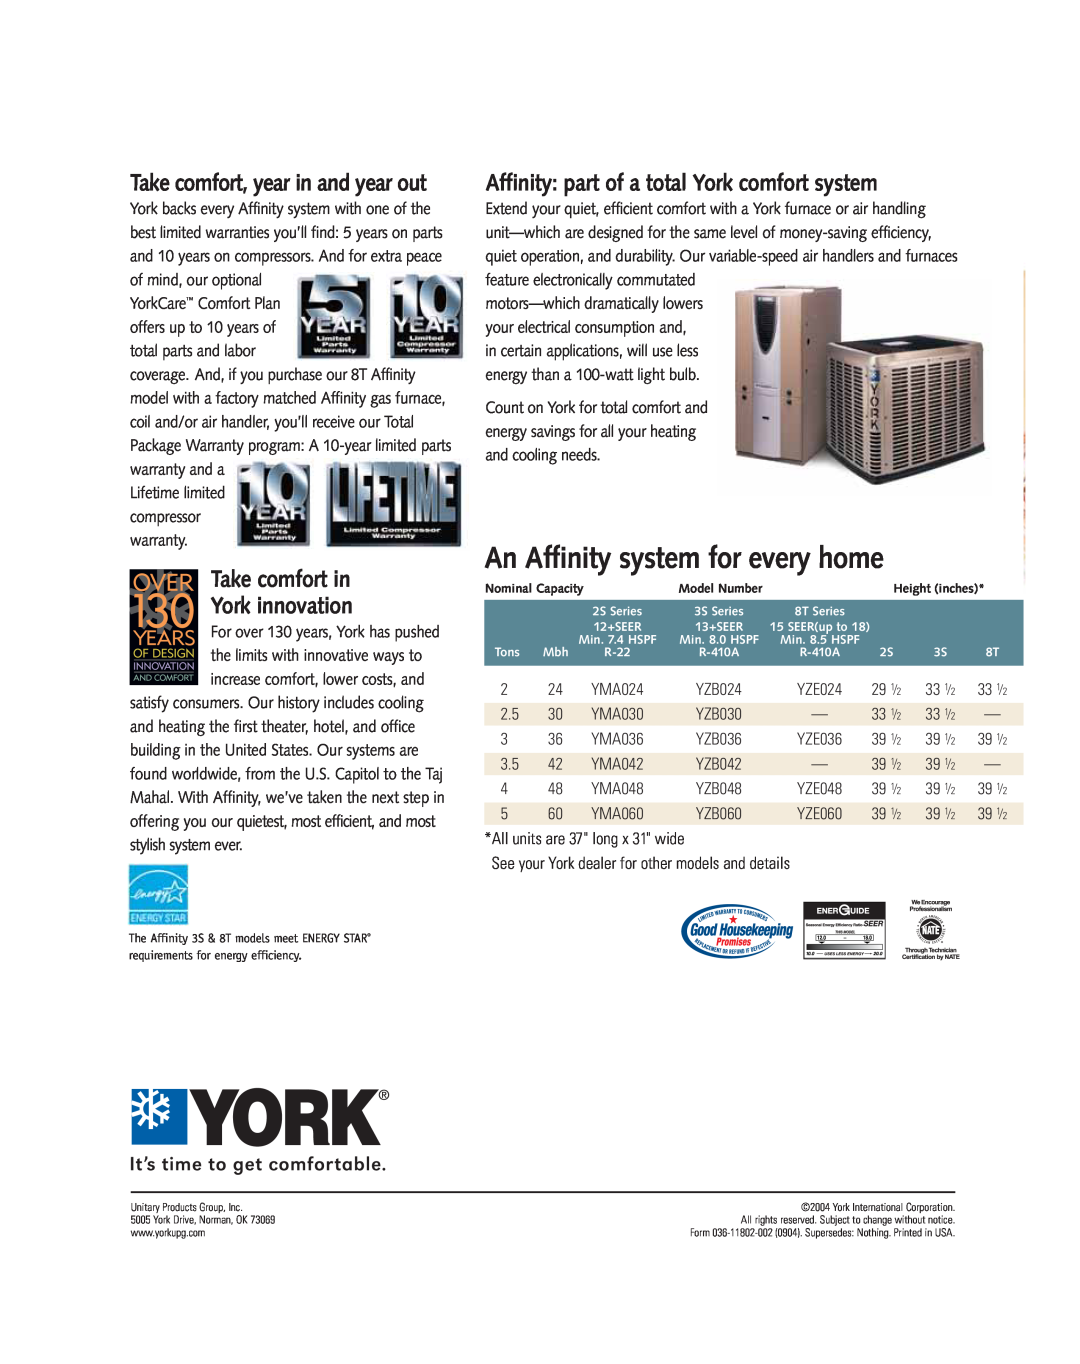 York 3S Take comfort in York innovation, Affinity part of a total York comfort system, An Affinity system for every home 